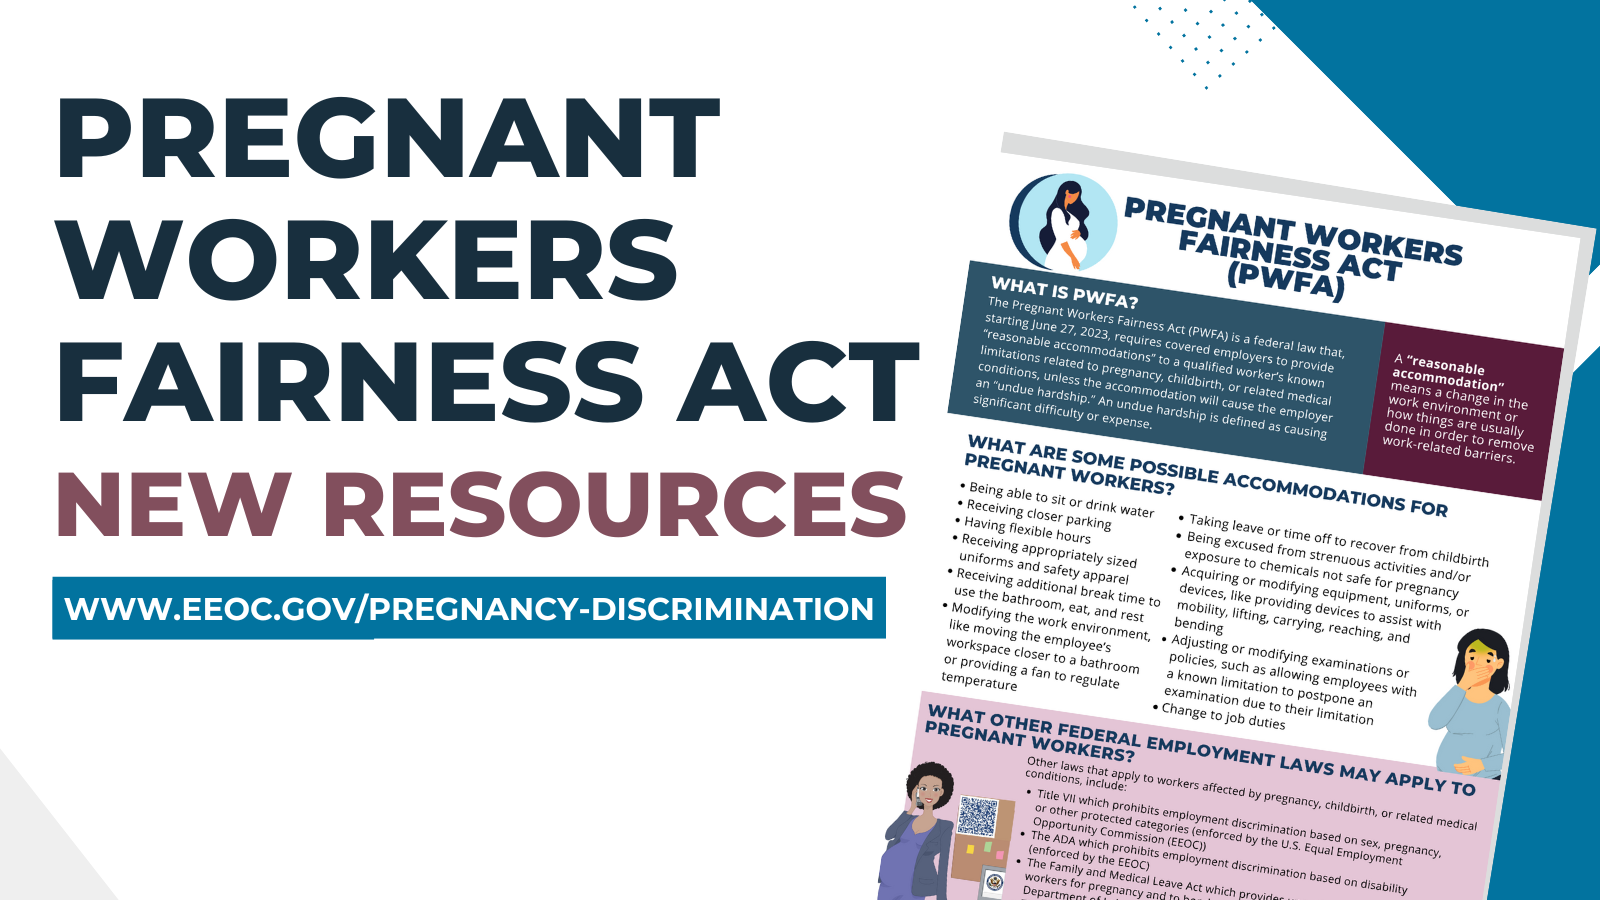 Pregnant Workers Fairness Act New Resources www.EEOC.gov/Pregnancy-Discrimination